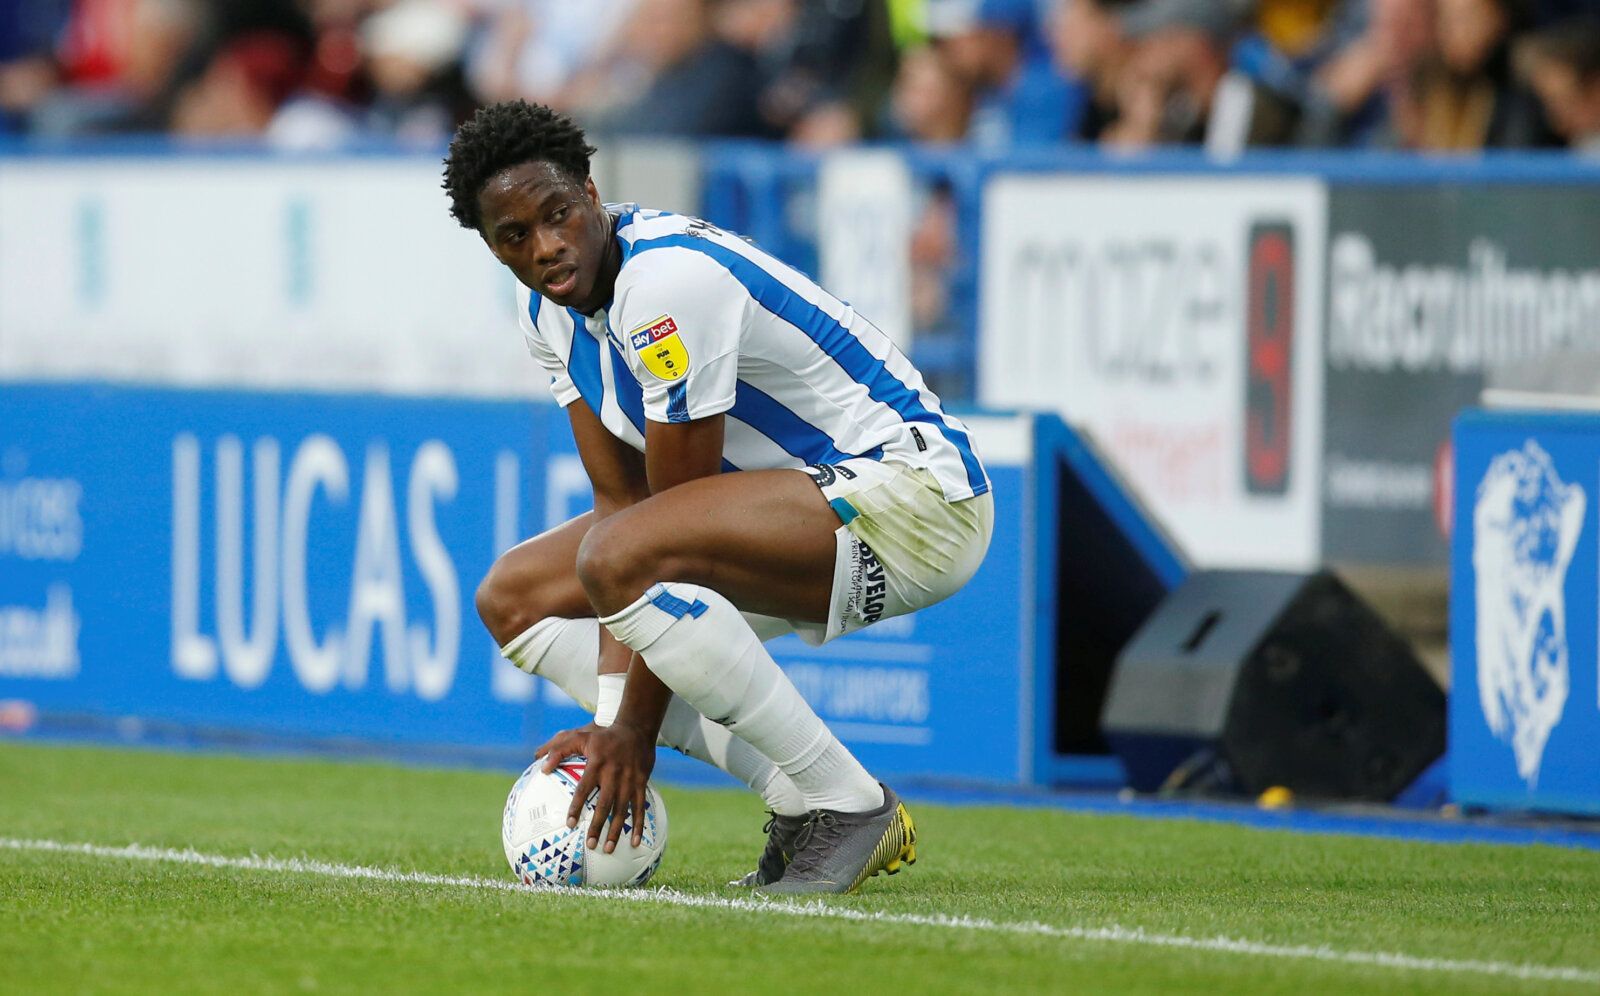 Soccer Football - Championship - Huddersfield Town v Derby County - John Smith's Stadium, Huddersfield, Britain - August 5, 2019  Huddersfield Town's Terence Kongolo  Action Images/Ed Sykes  EDITORIAL USE ONLY. No use with unauthorized audio, video, data, fixture lists, club/league logos or 